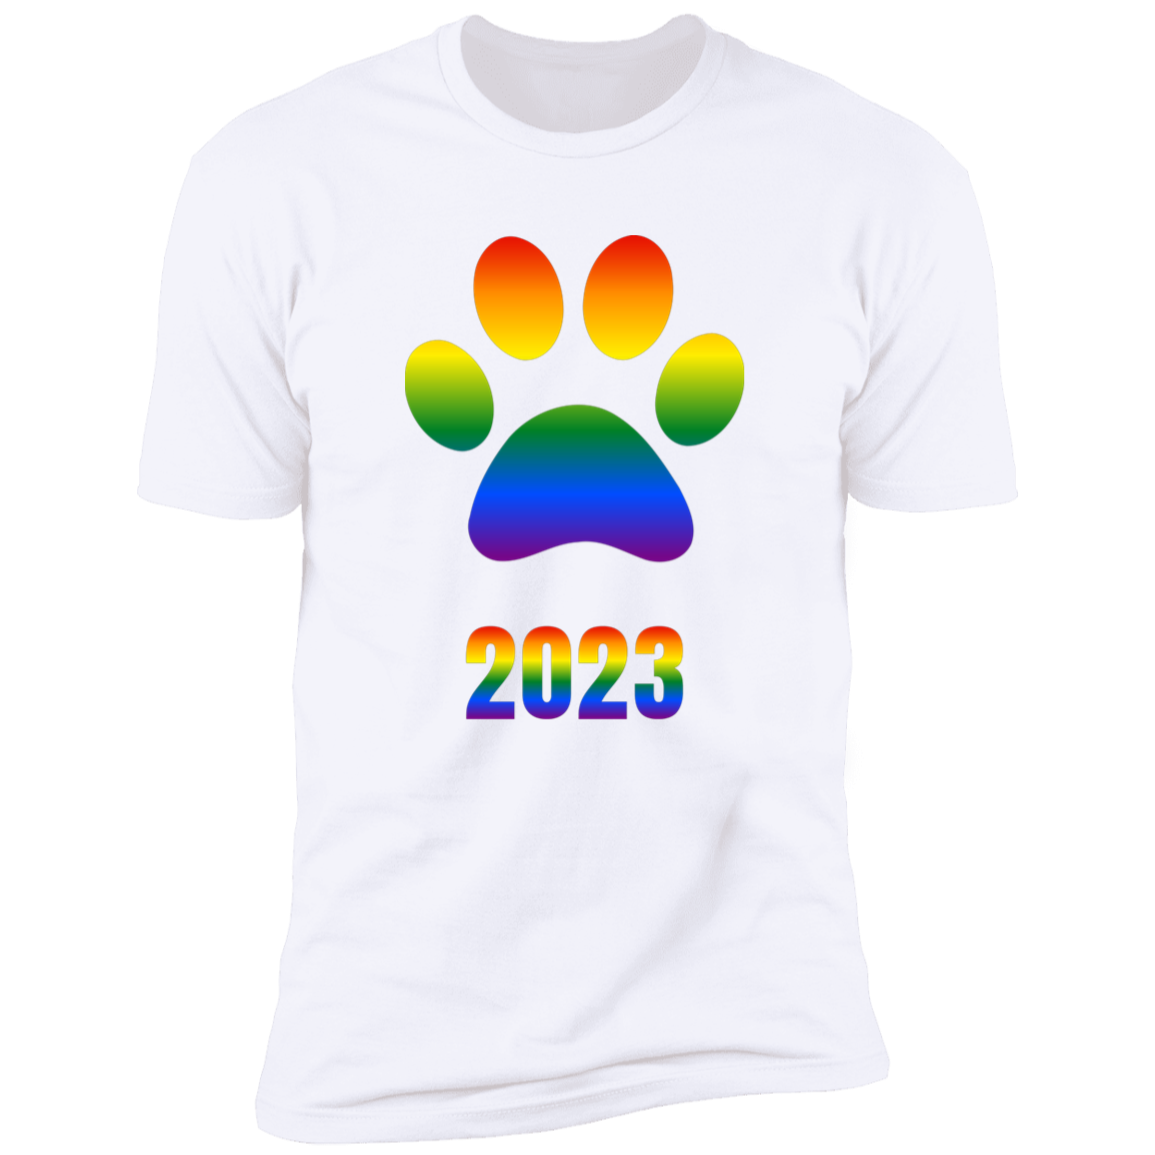 Dog Paw pride 2023 t-shirt, dog pride dog shirt for humans, in white